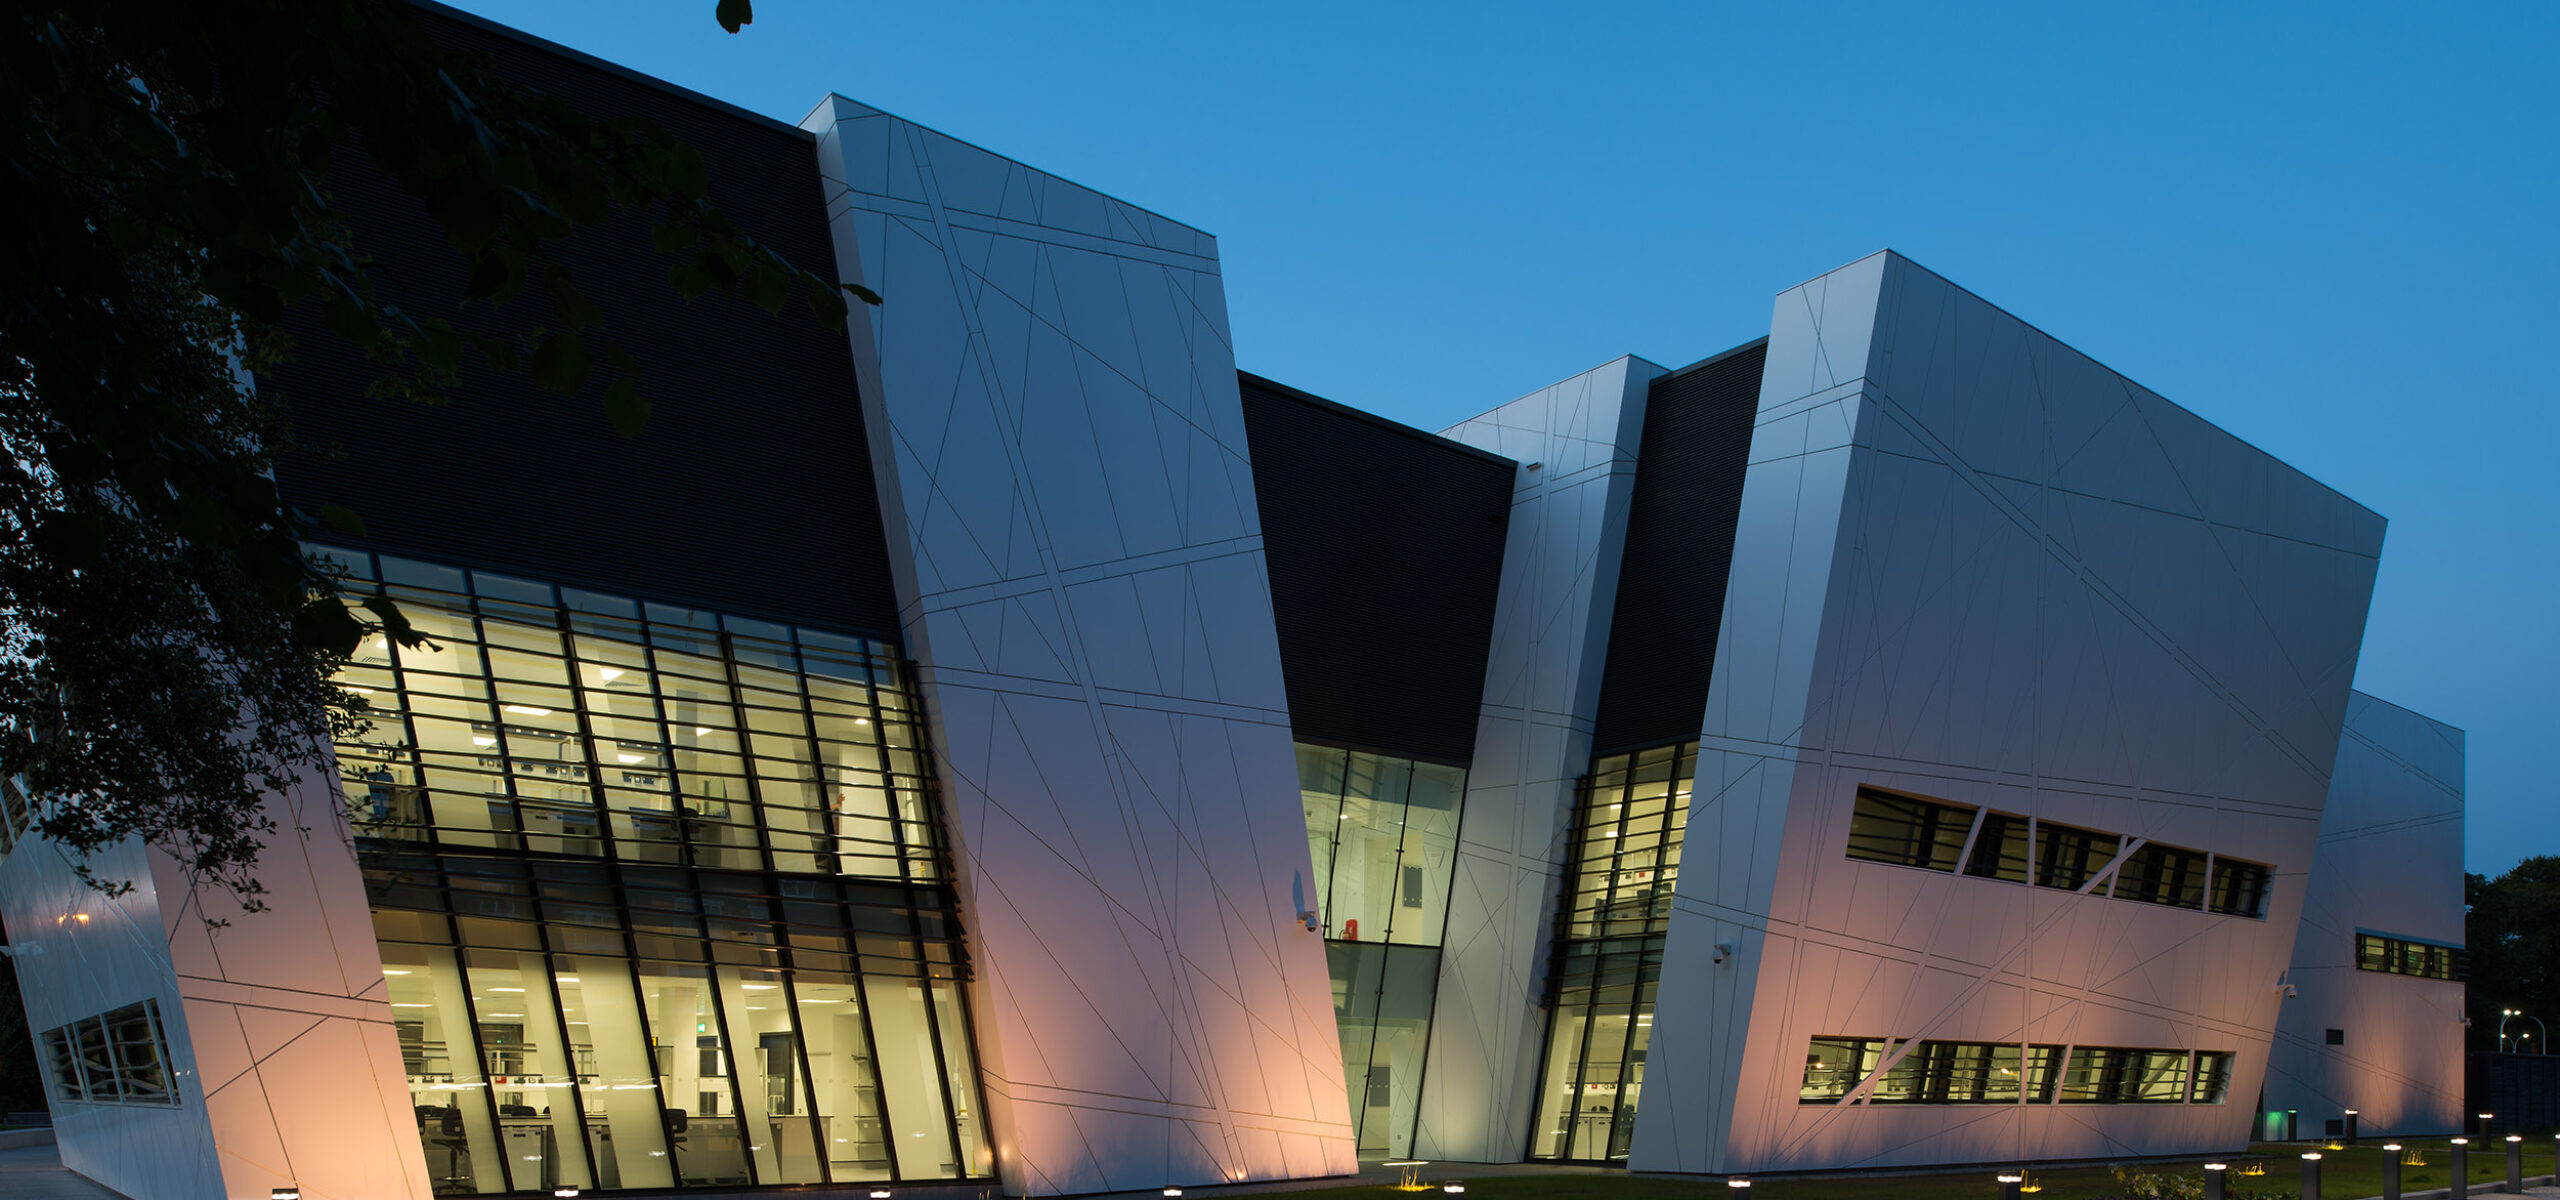 Exterior of the Oglesby Cancer Research Building at nighttime